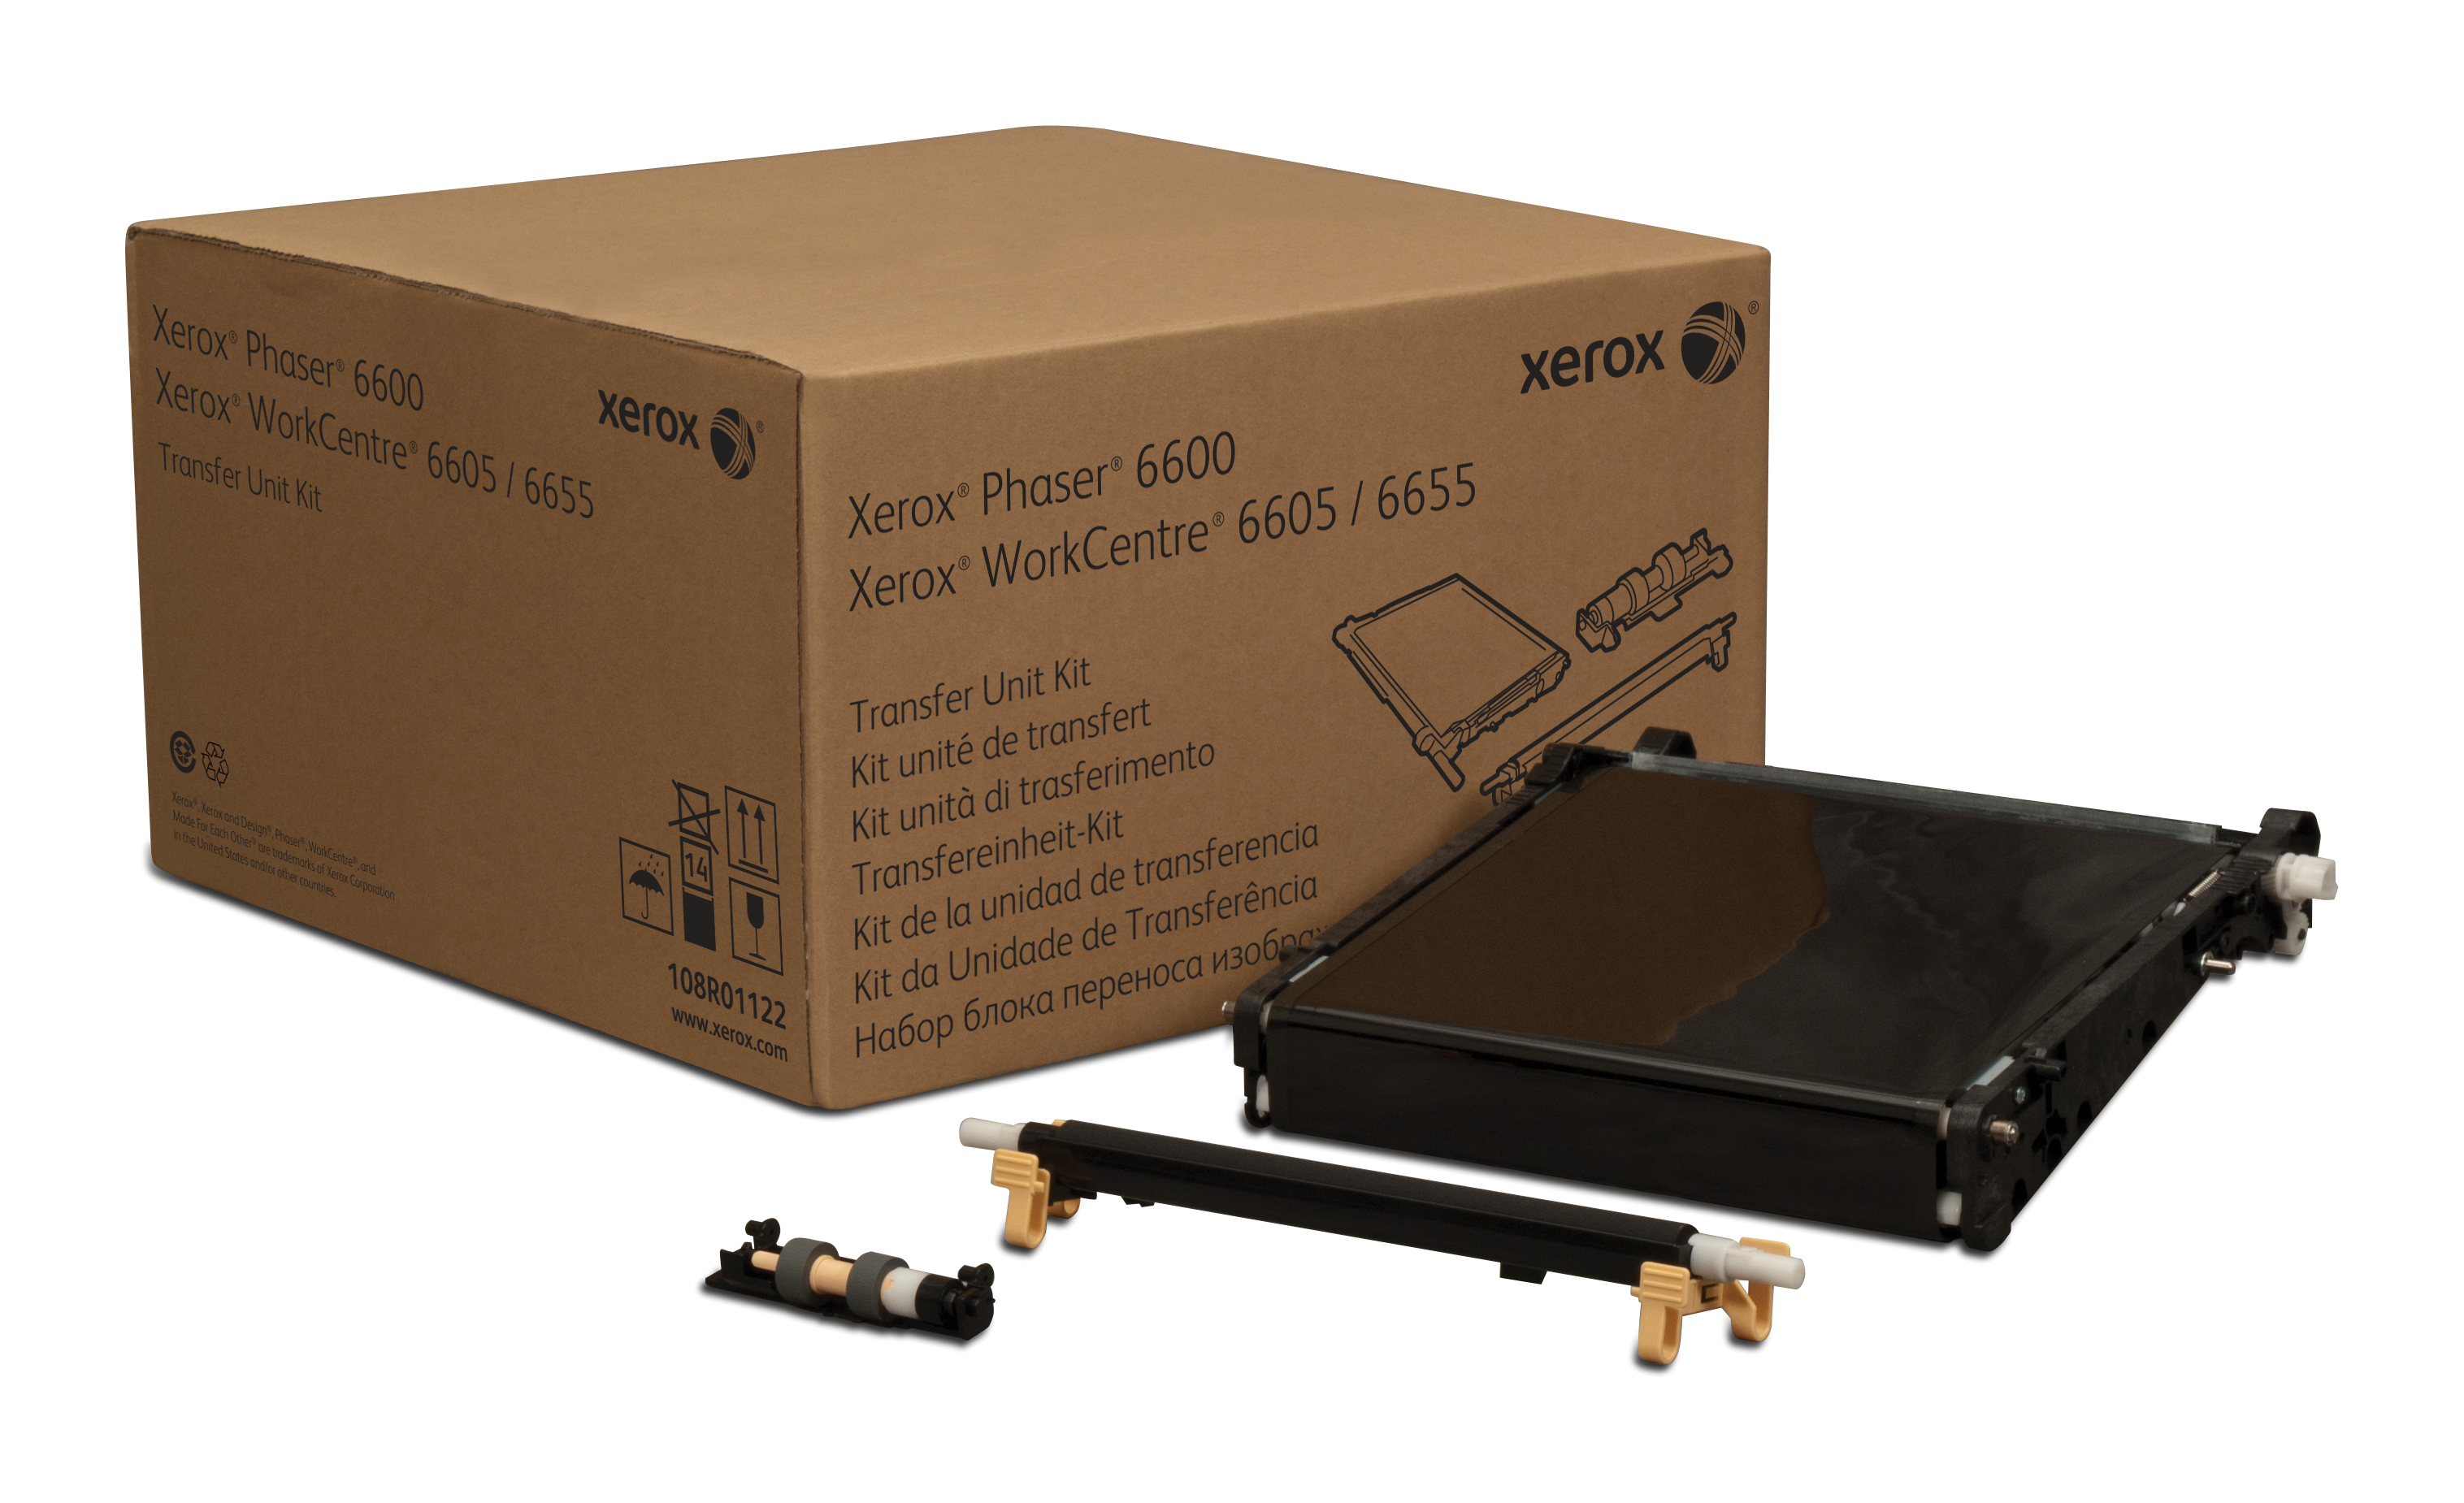 Phaser 6600/WorkCentre 6605 Transfer Unit Kit (Long-Life Item, Typically Not Required At Average Usage Levels)